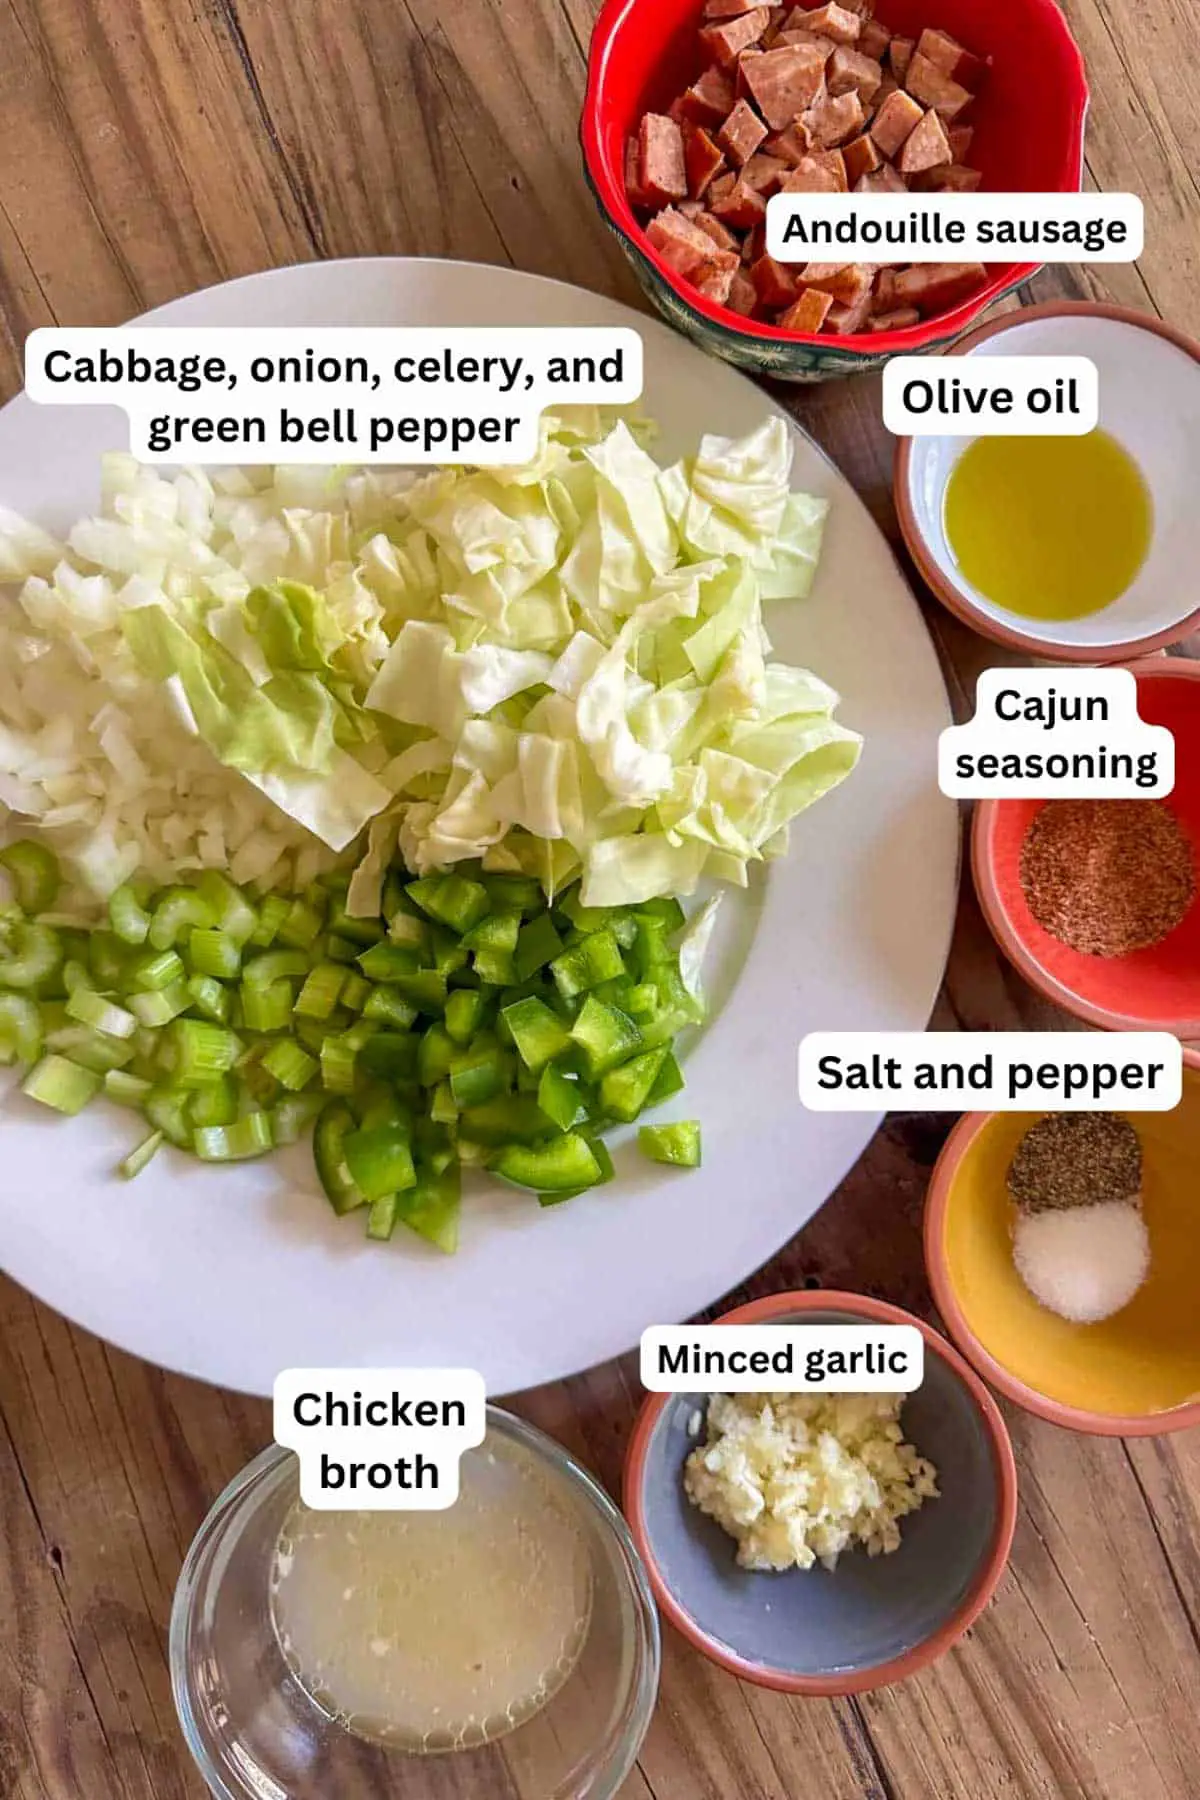 Ingredients for smothered cabbage including bowls containing Andouille Sausage, olive oil, Cajun seasoning, salt and pepper, minced garlic, chicken broth, and a plate with chopped cabbage, onion, celery and green bell pepper.